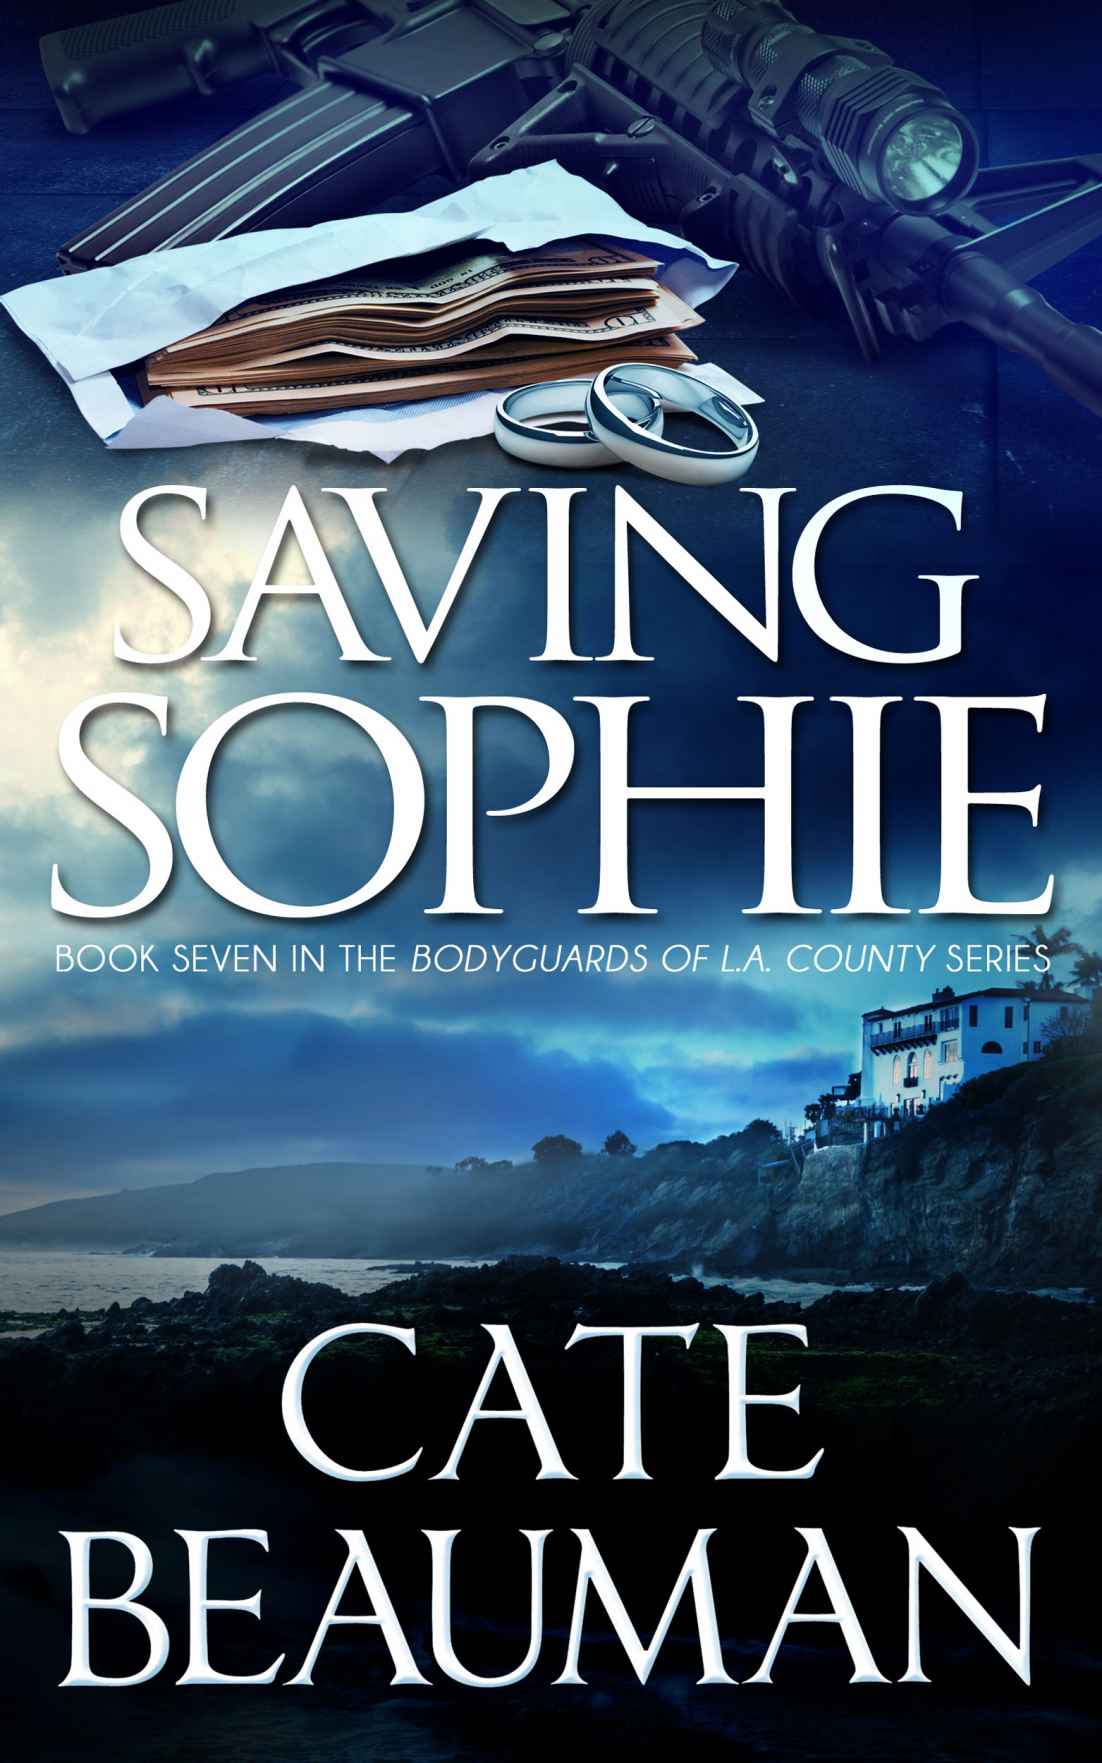 Saving Sophie: Book Seven In The Bodyguards Of L.A. County Series by Cate Beauman